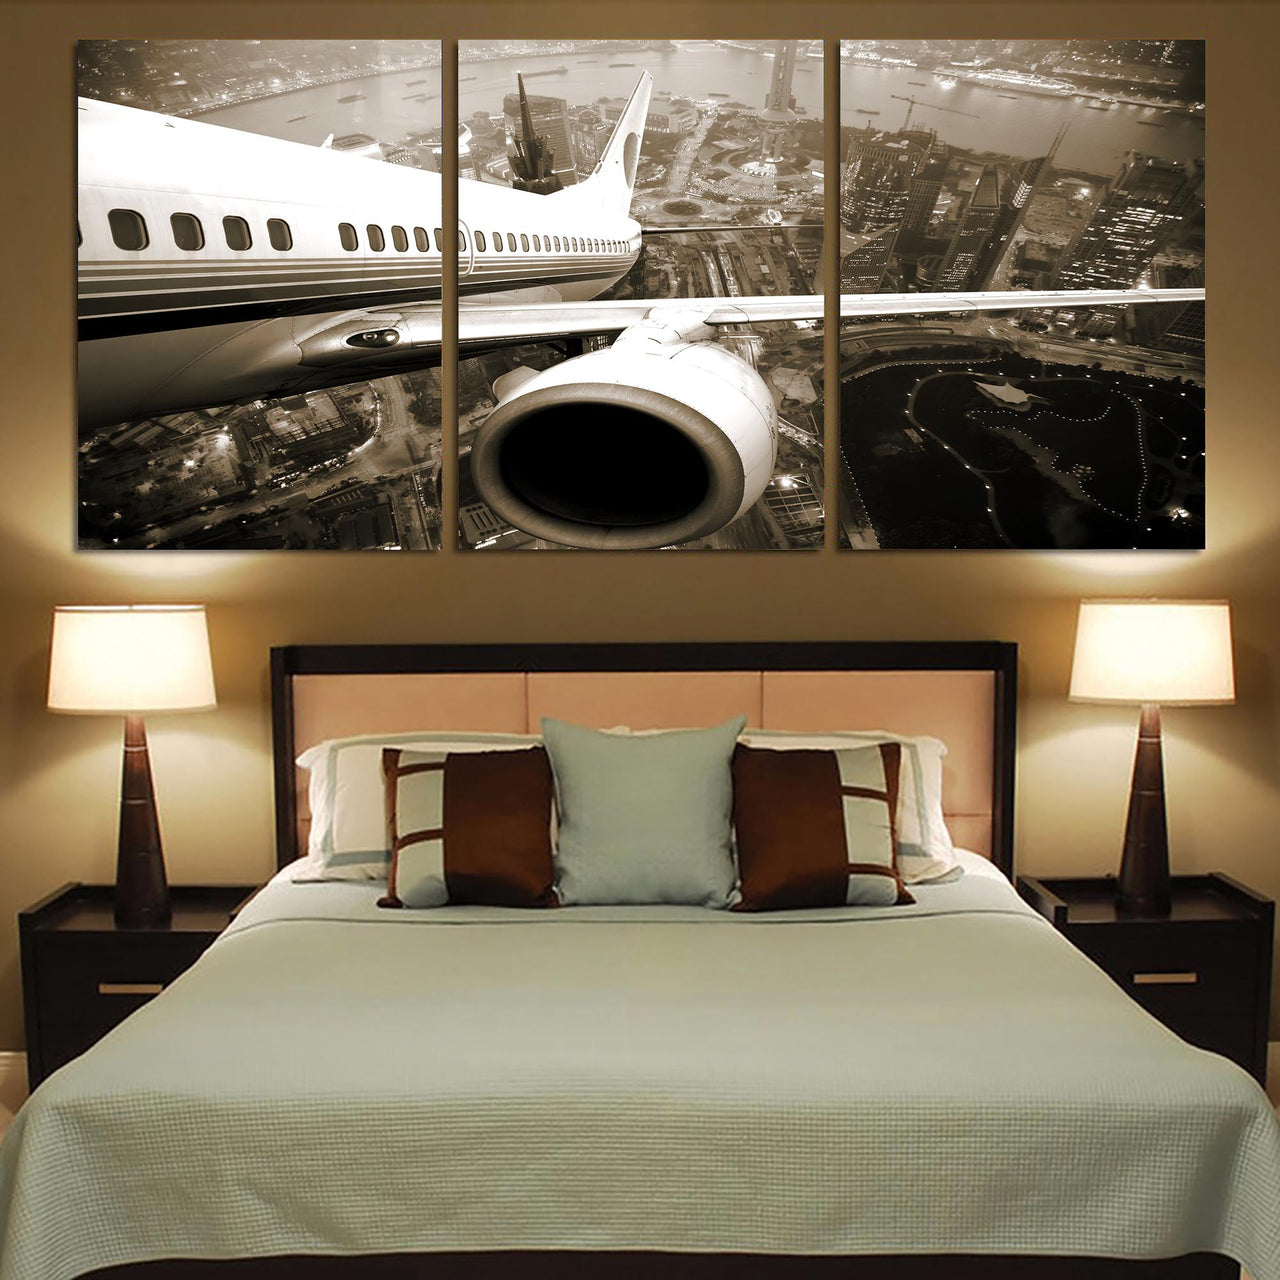 Departing Aircraft & City Scene behind Printed Canvas Posters (3 Pieces)